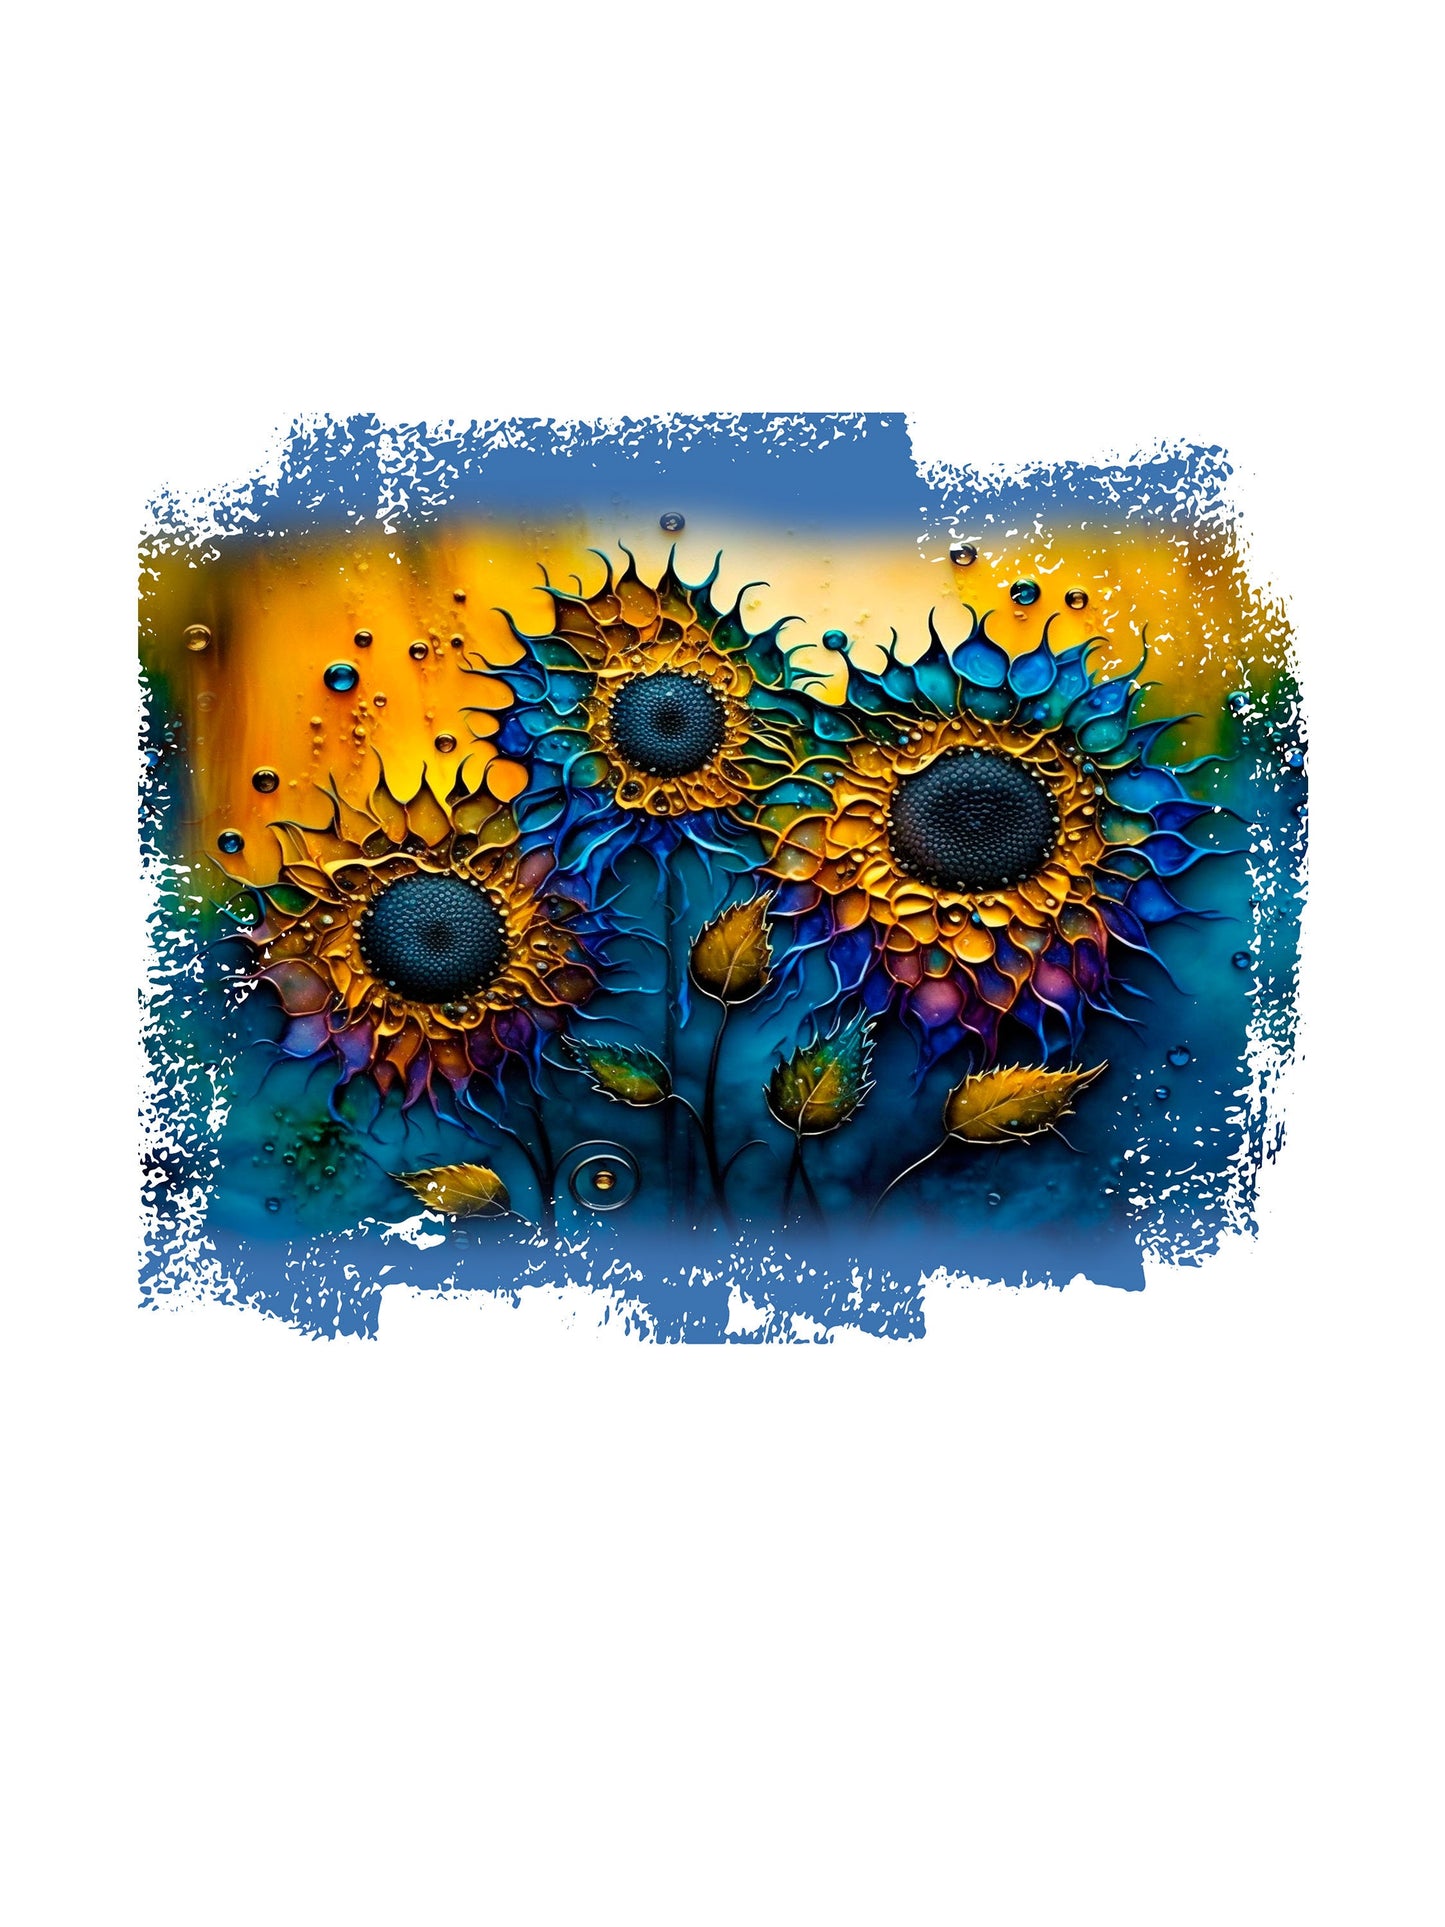 16x20 Sunflowers in Blue Floral Wall Art Canvas Print